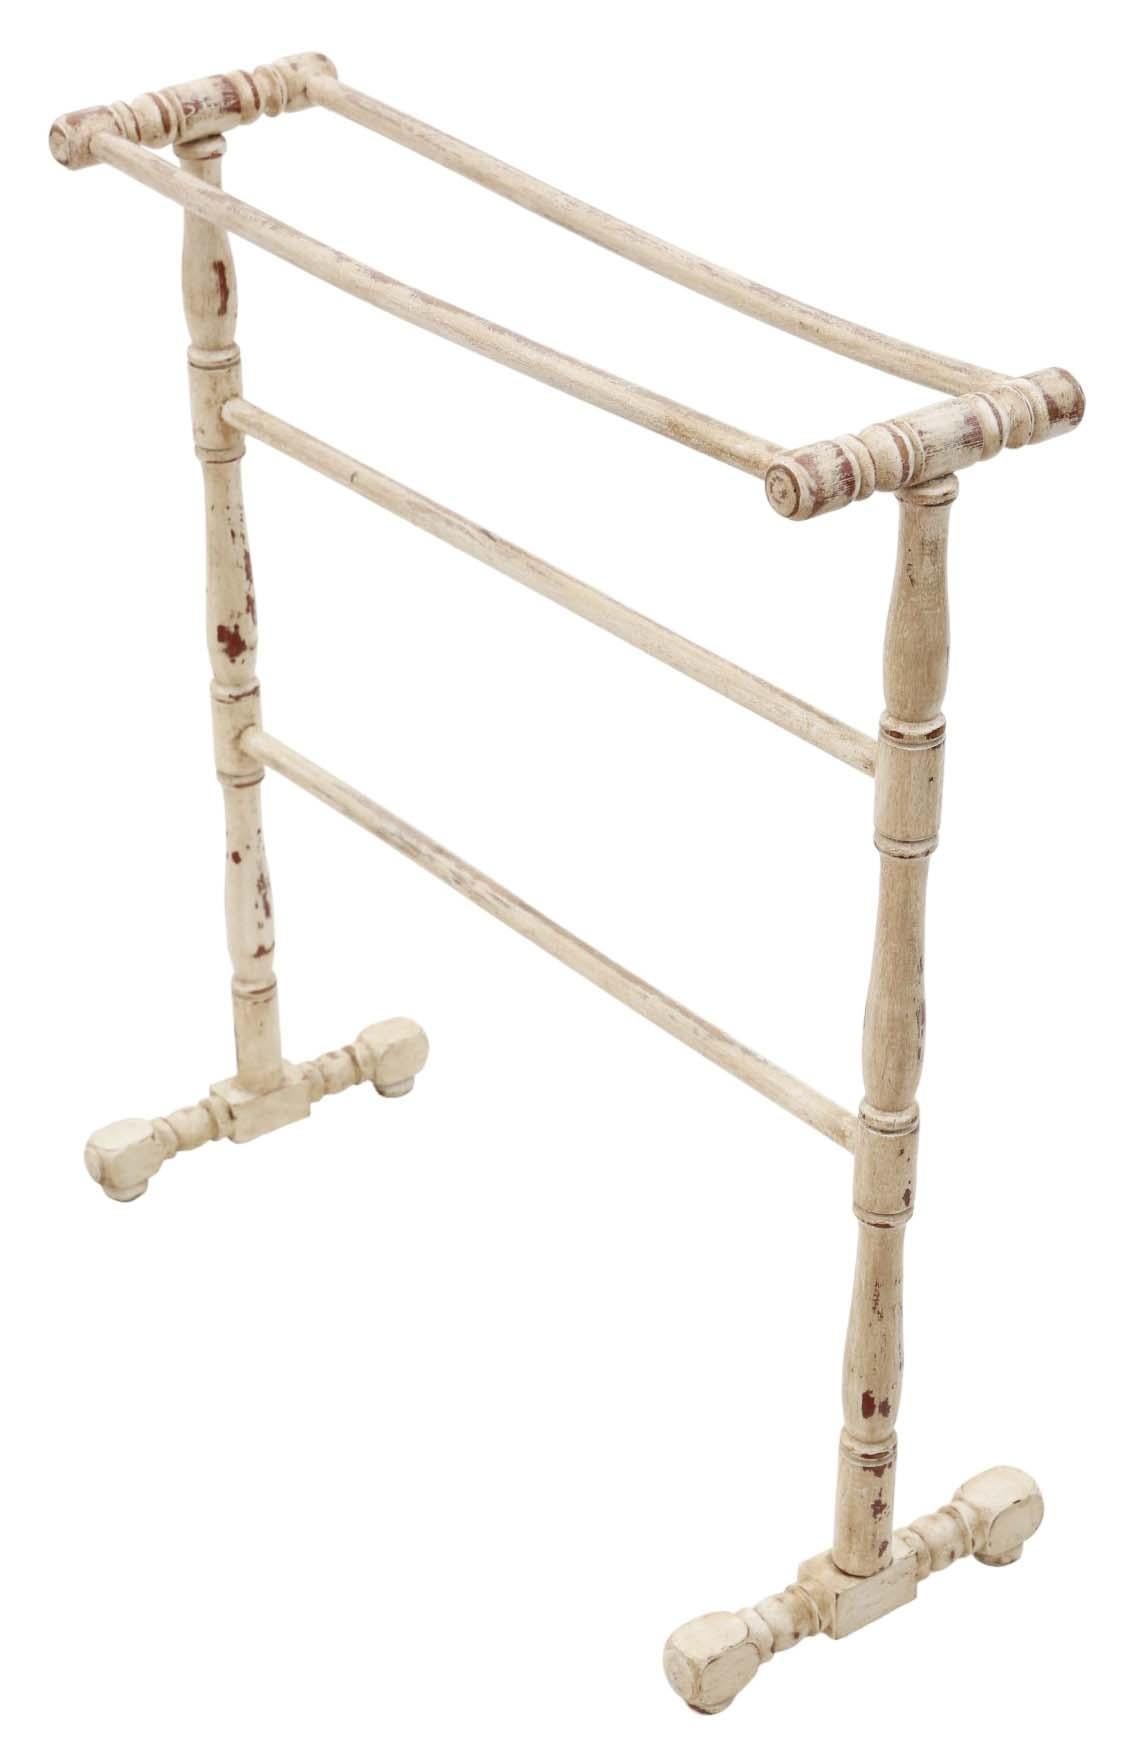 Antique, high-quality circa 1900 painted towel rail stand in Art Nouveau style, boasting a distressed paint finish.

This piece features solid construction with no loose joints and no signs of woodworm.

Sure to make a stunning statement in the